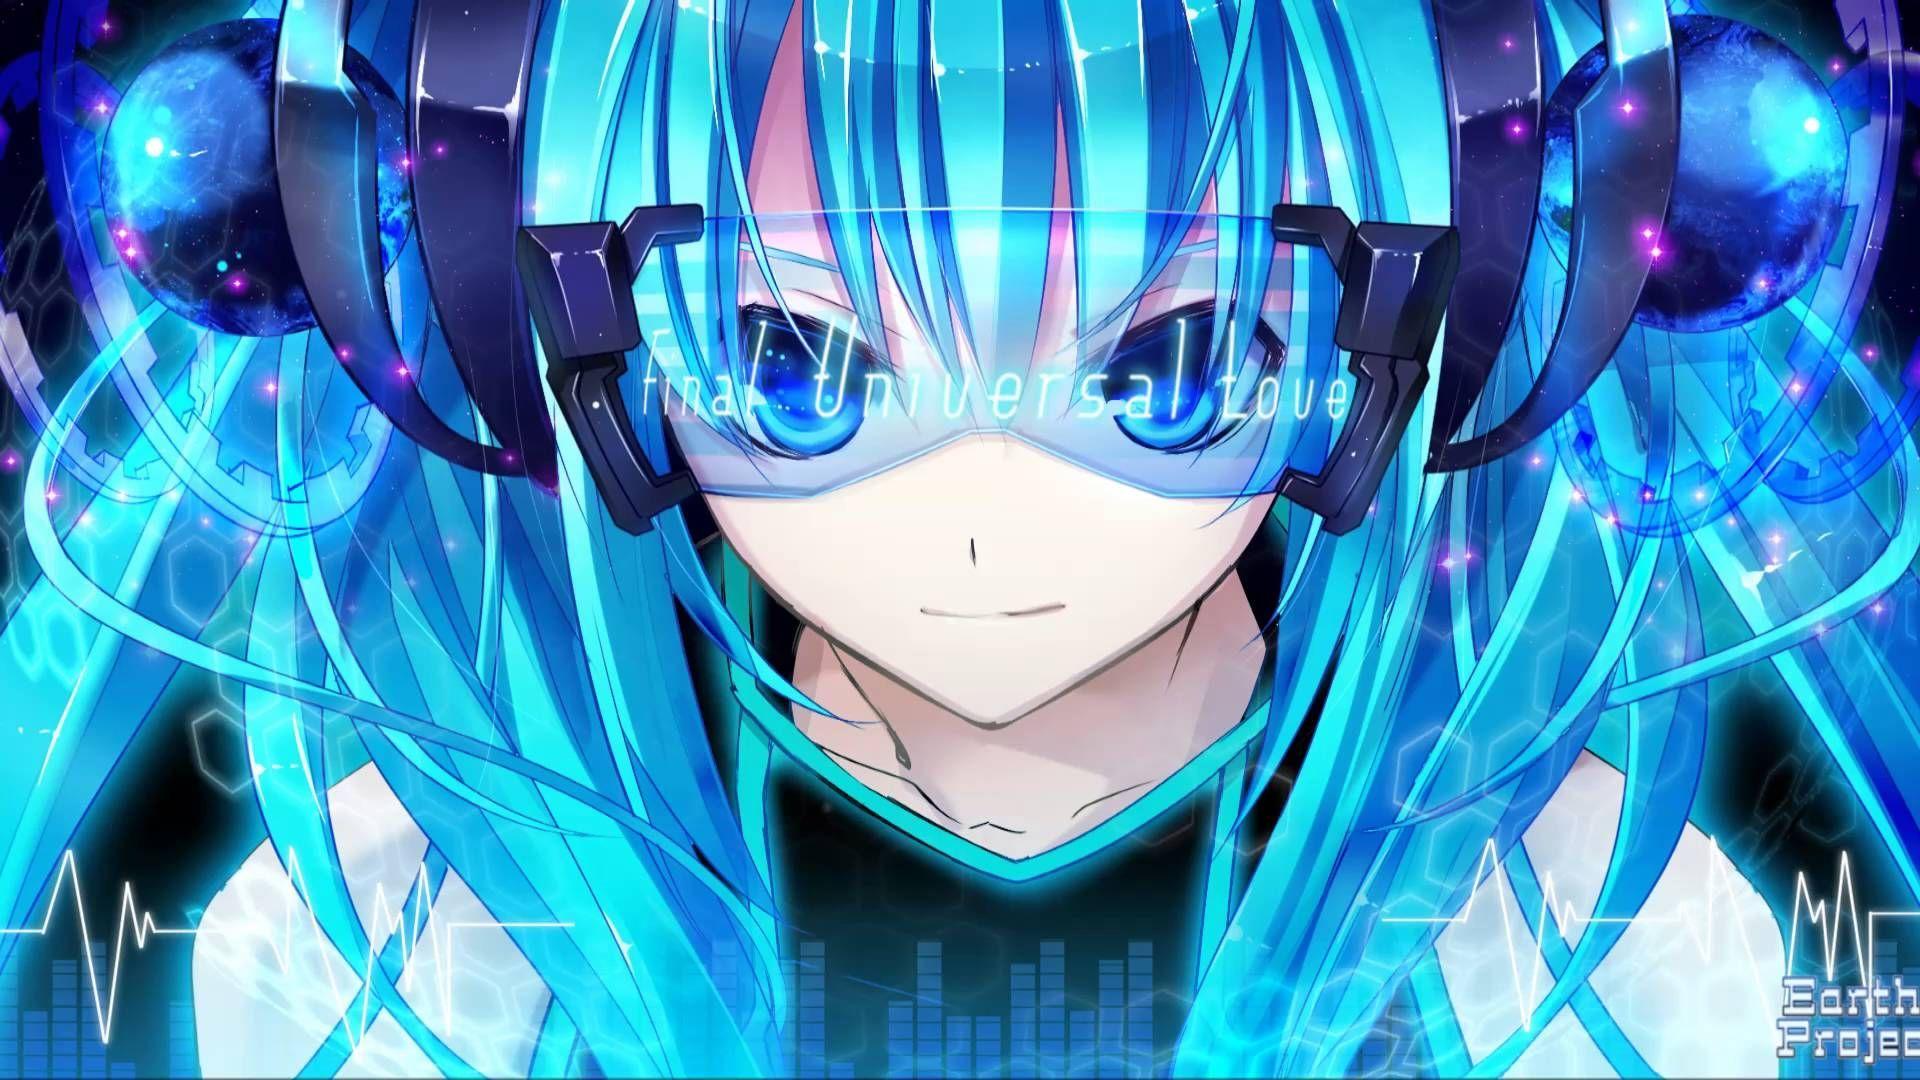 Anime Techno Wallpapers - Top Free Anime Techno Backgrounds ...